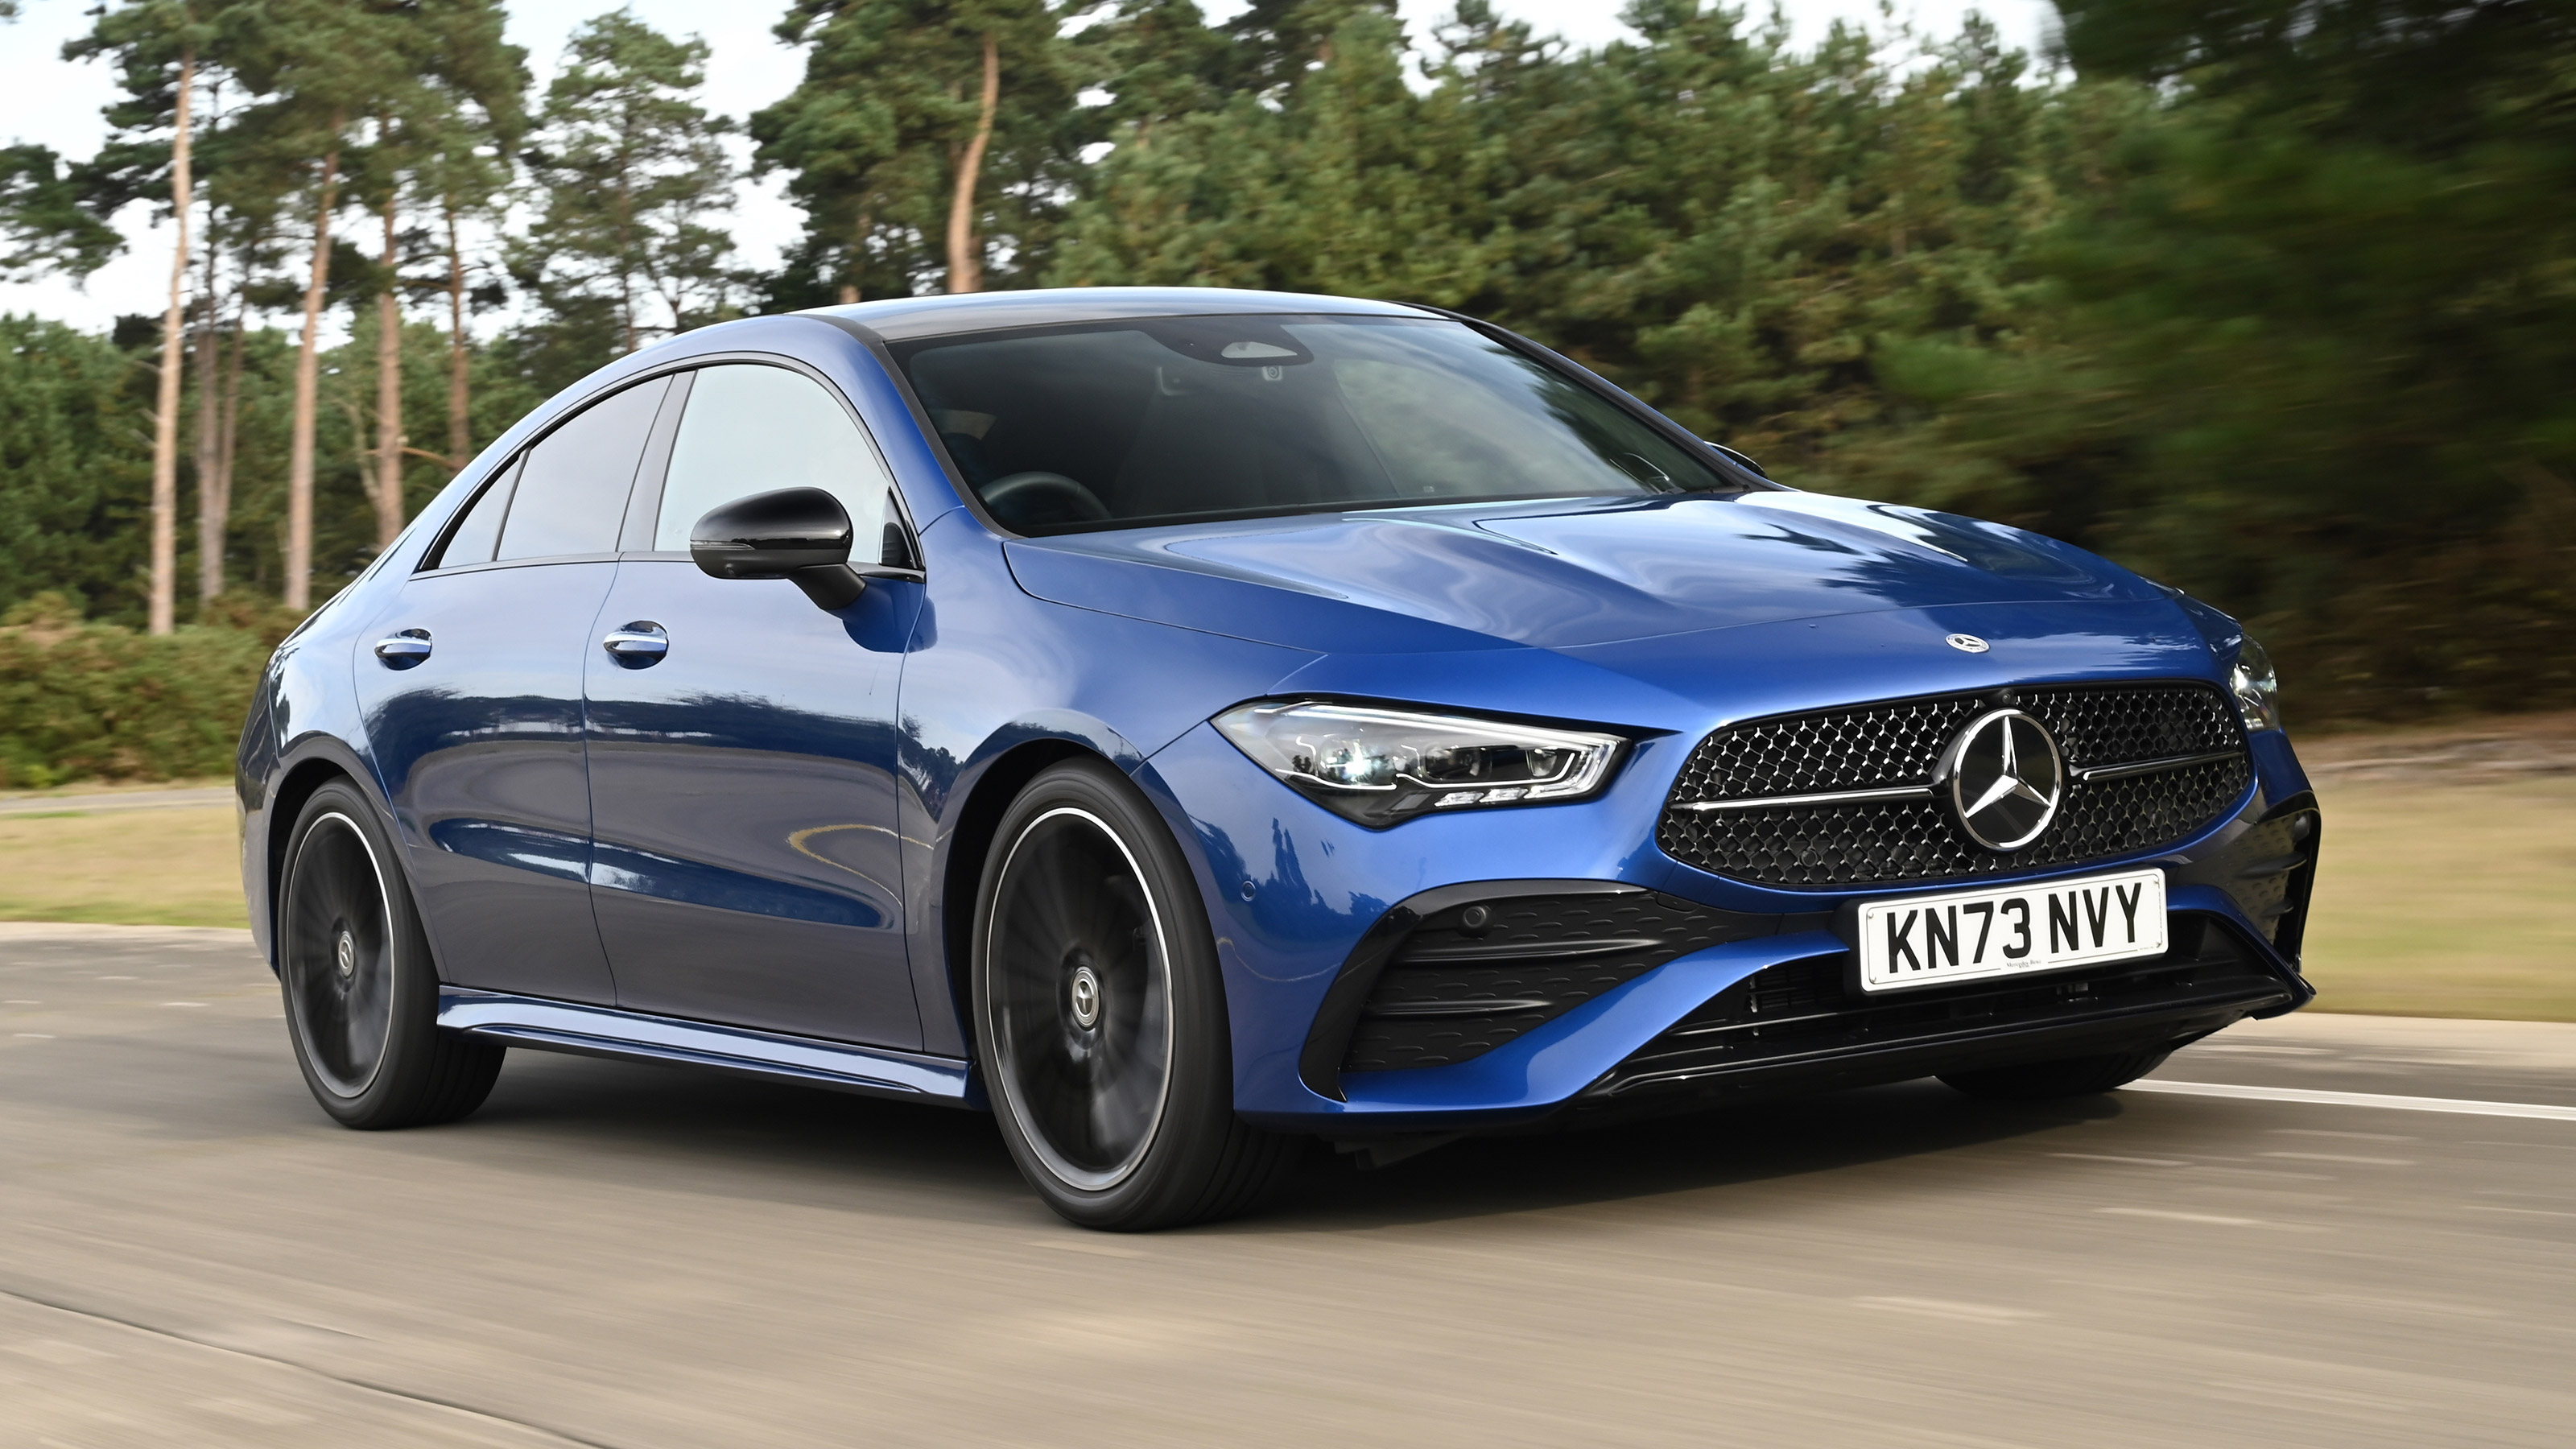 https://mediacloud.carbuyer.co.uk/image/private/s--xFUJwJgz--/v1700057575/carbuyer/2023/11/Mercedes%20CLA%20review%202023-3.jpg